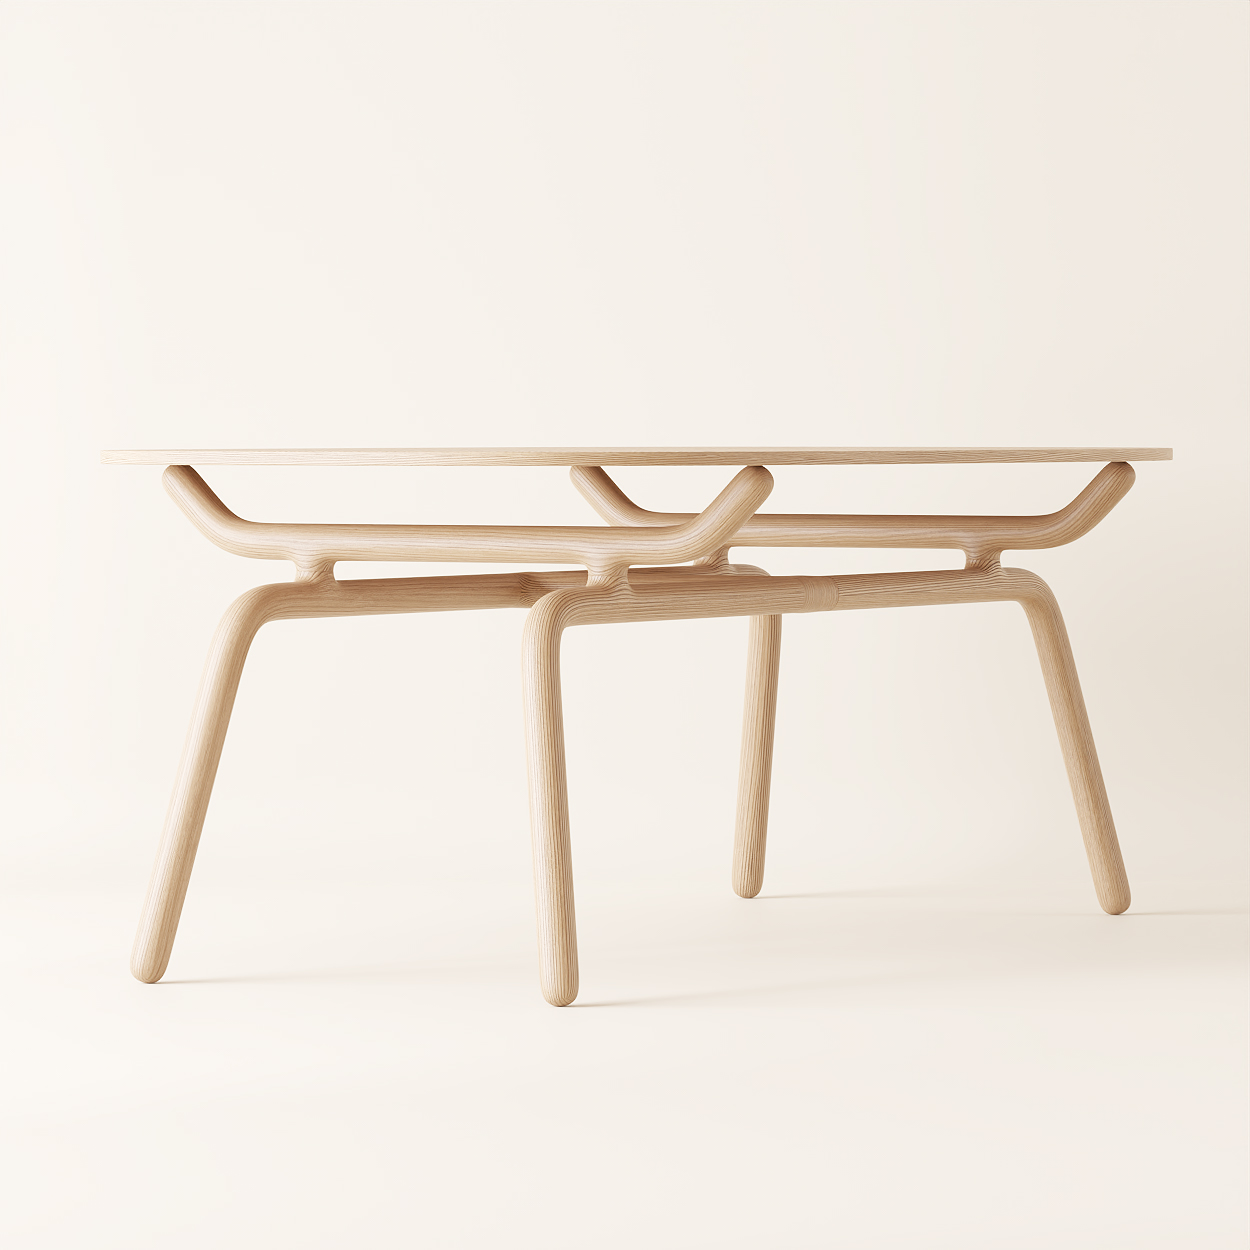 Link dining table by Teixeira Design Studio